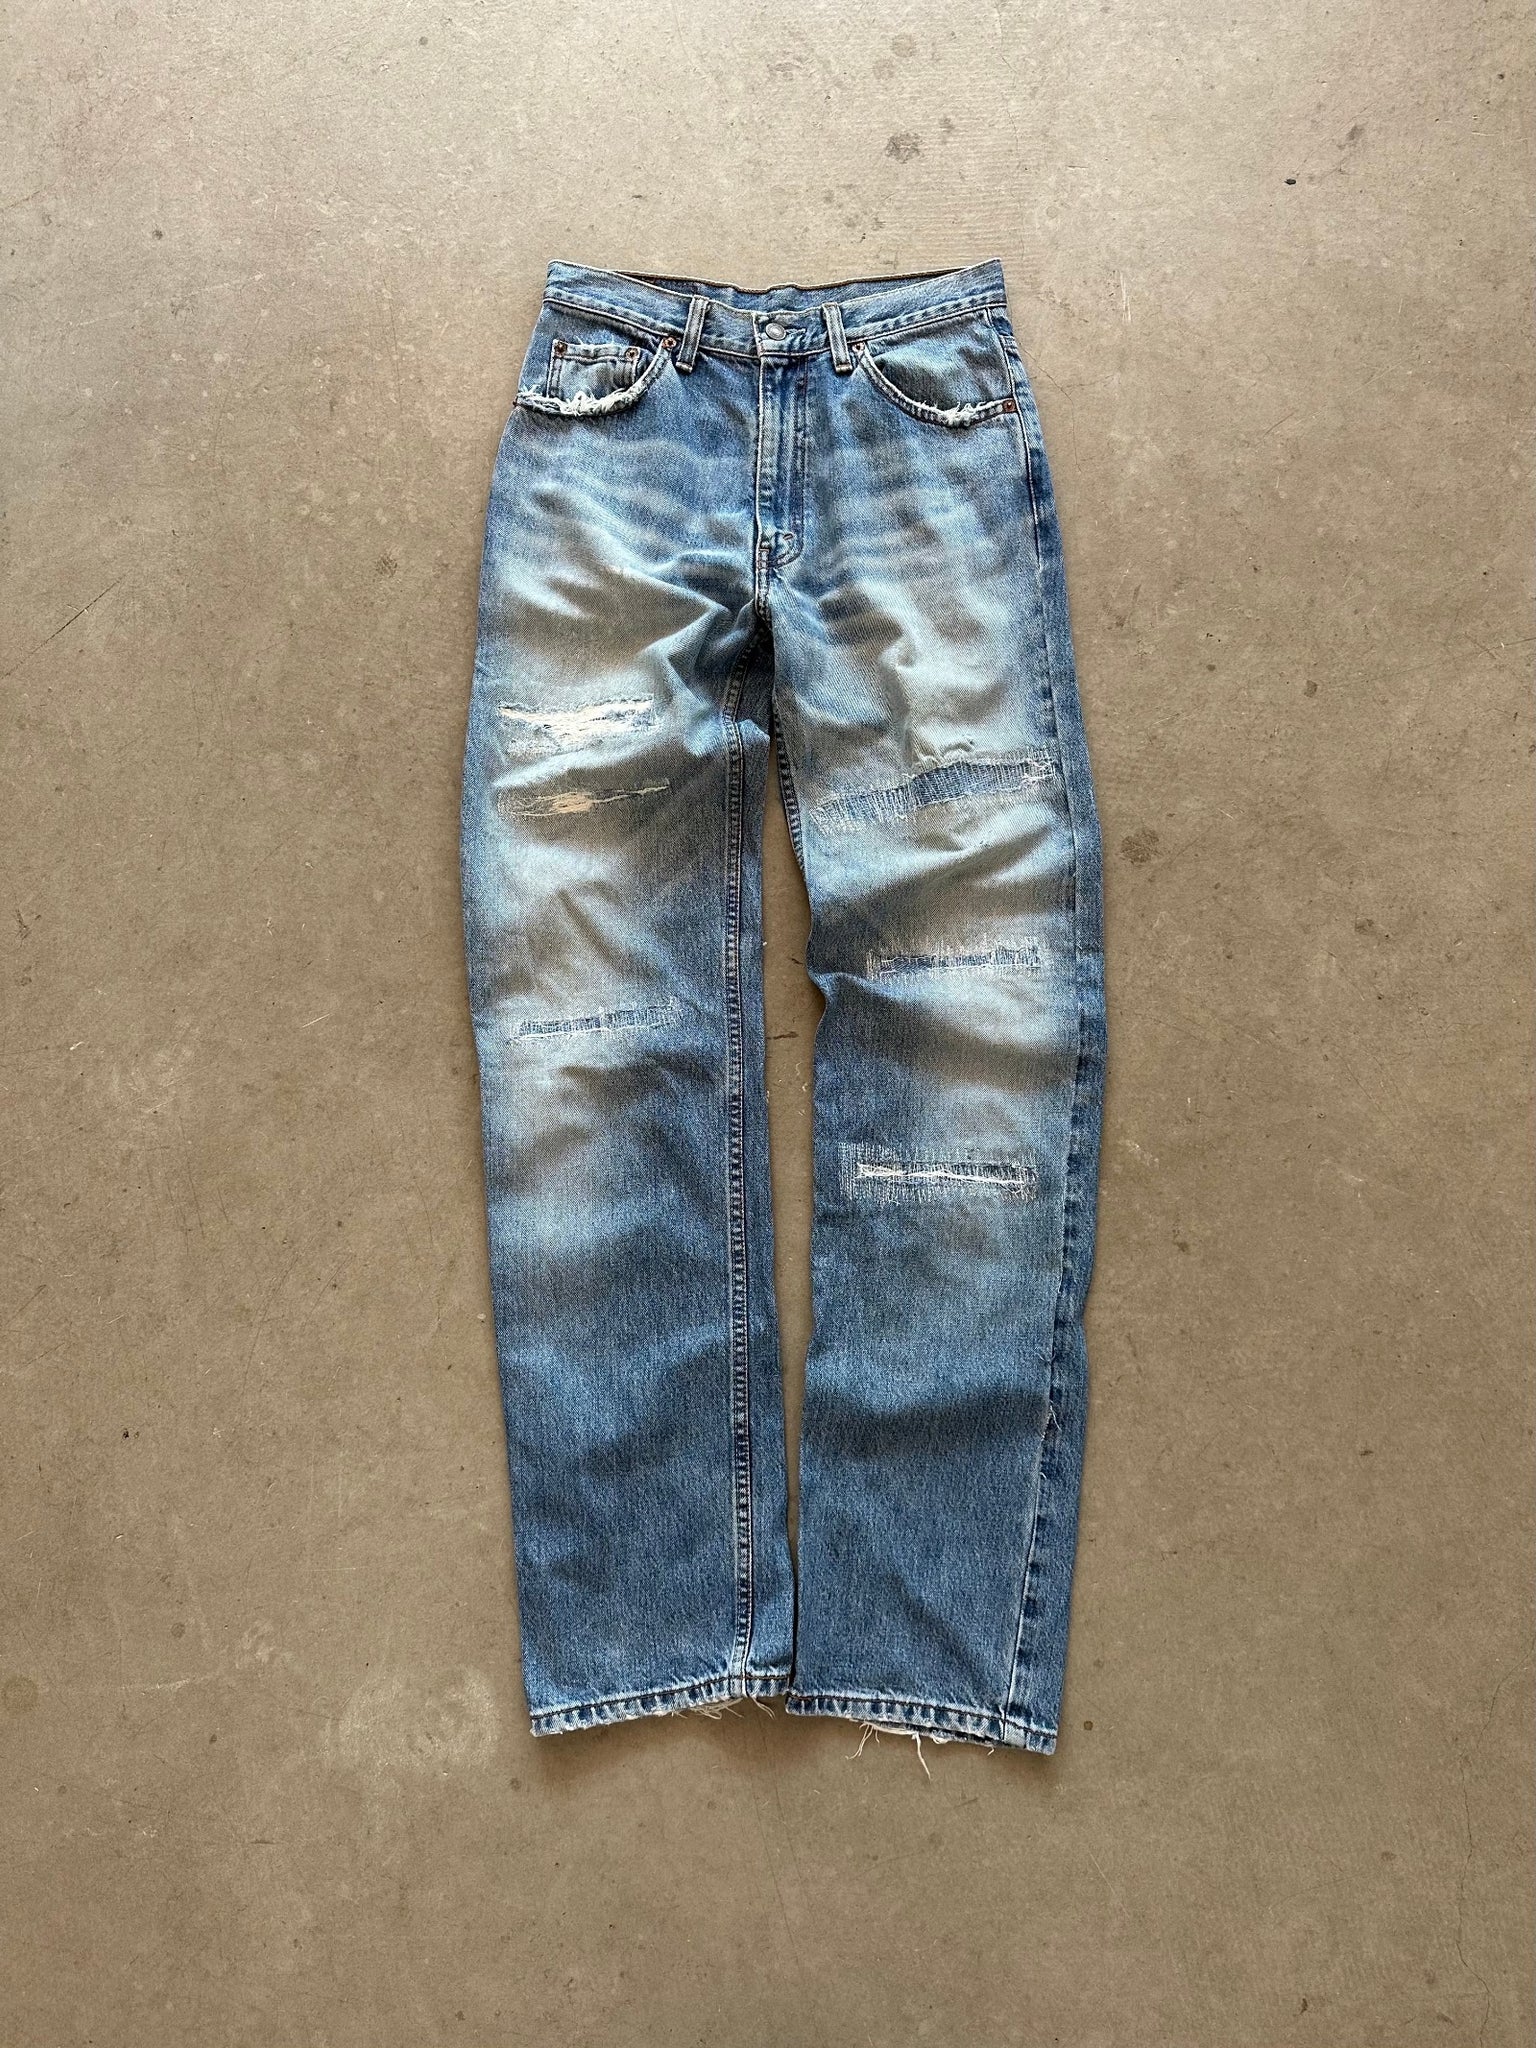 1990's Levi's 501 Repaired Jeans - 29 x 34